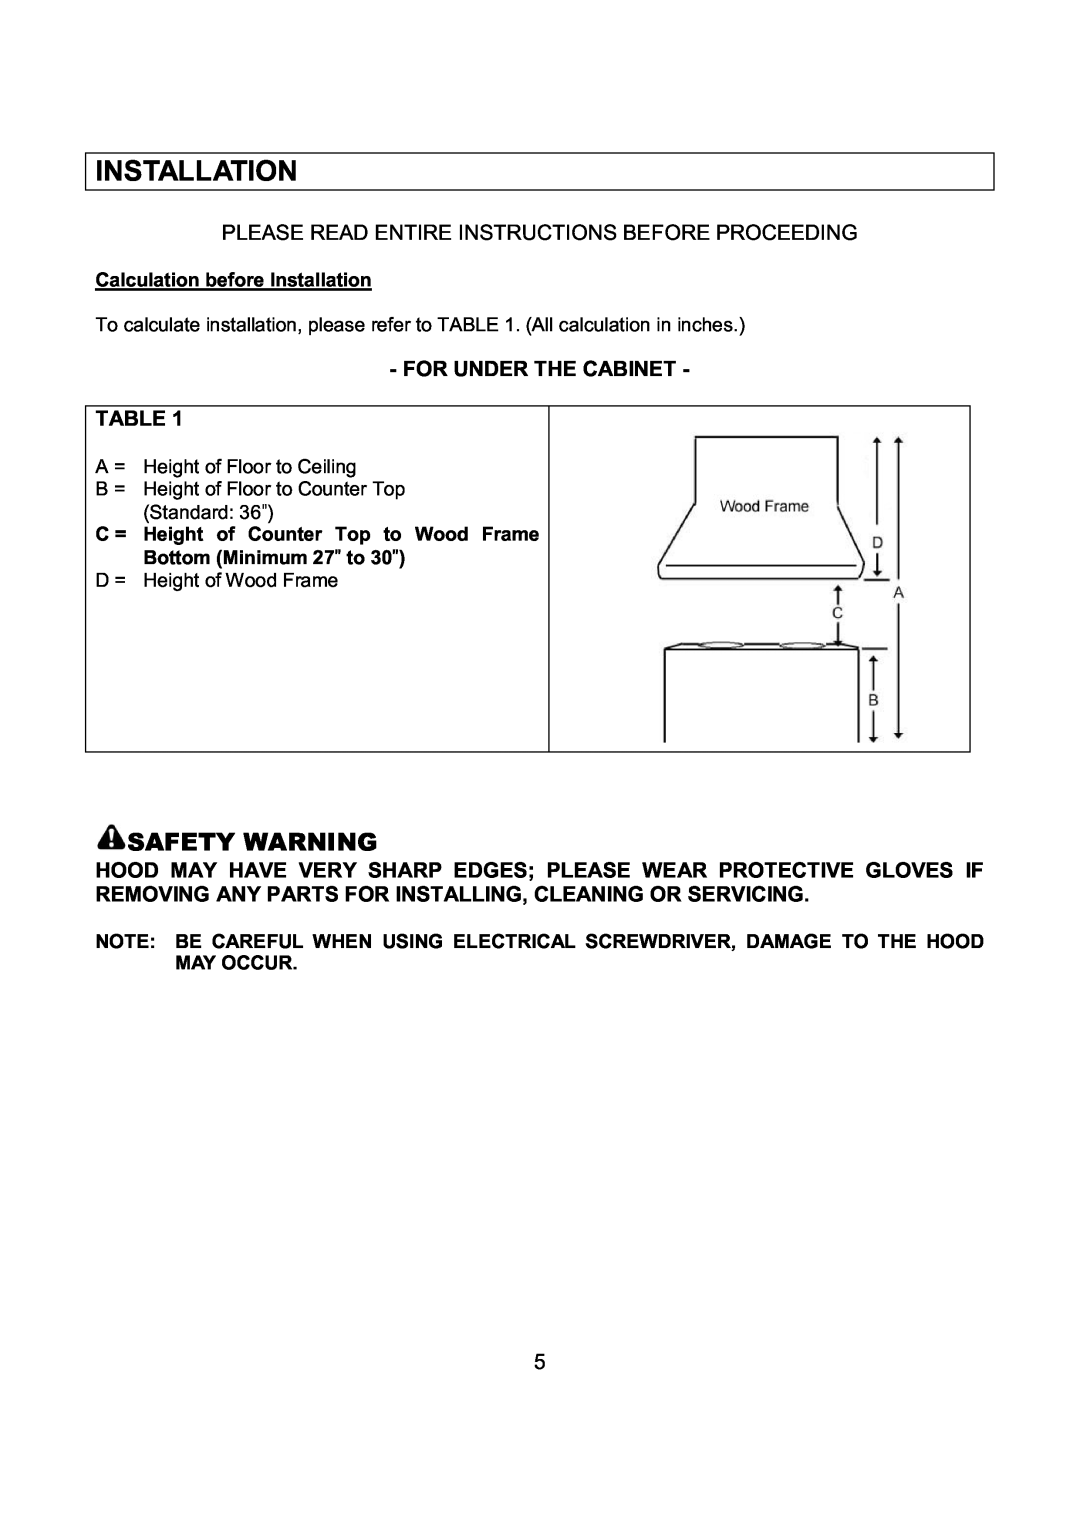 Kobe Range Hoods IN2636SQB-1 Safety Warning, For Under The Cabinet, Calculation before Installation 